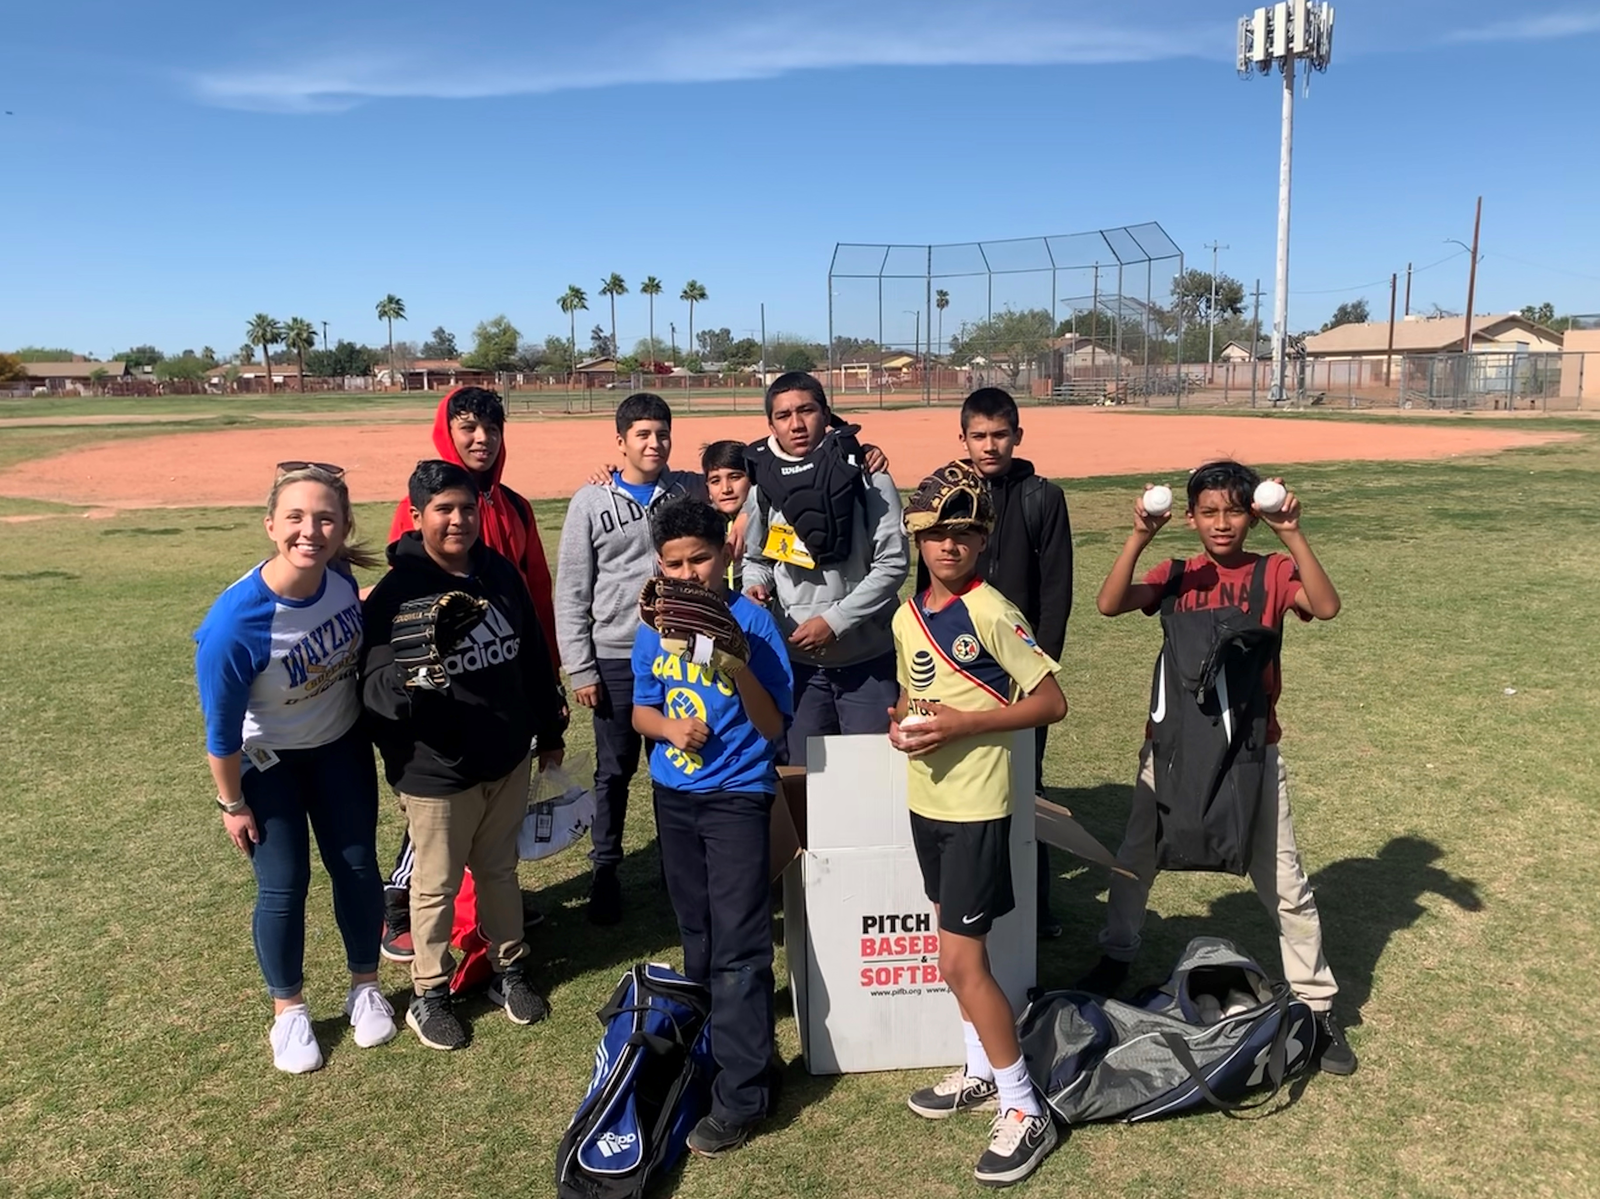 Baseball Breeds Connection and Motivation for Kids at Isaac Middle School